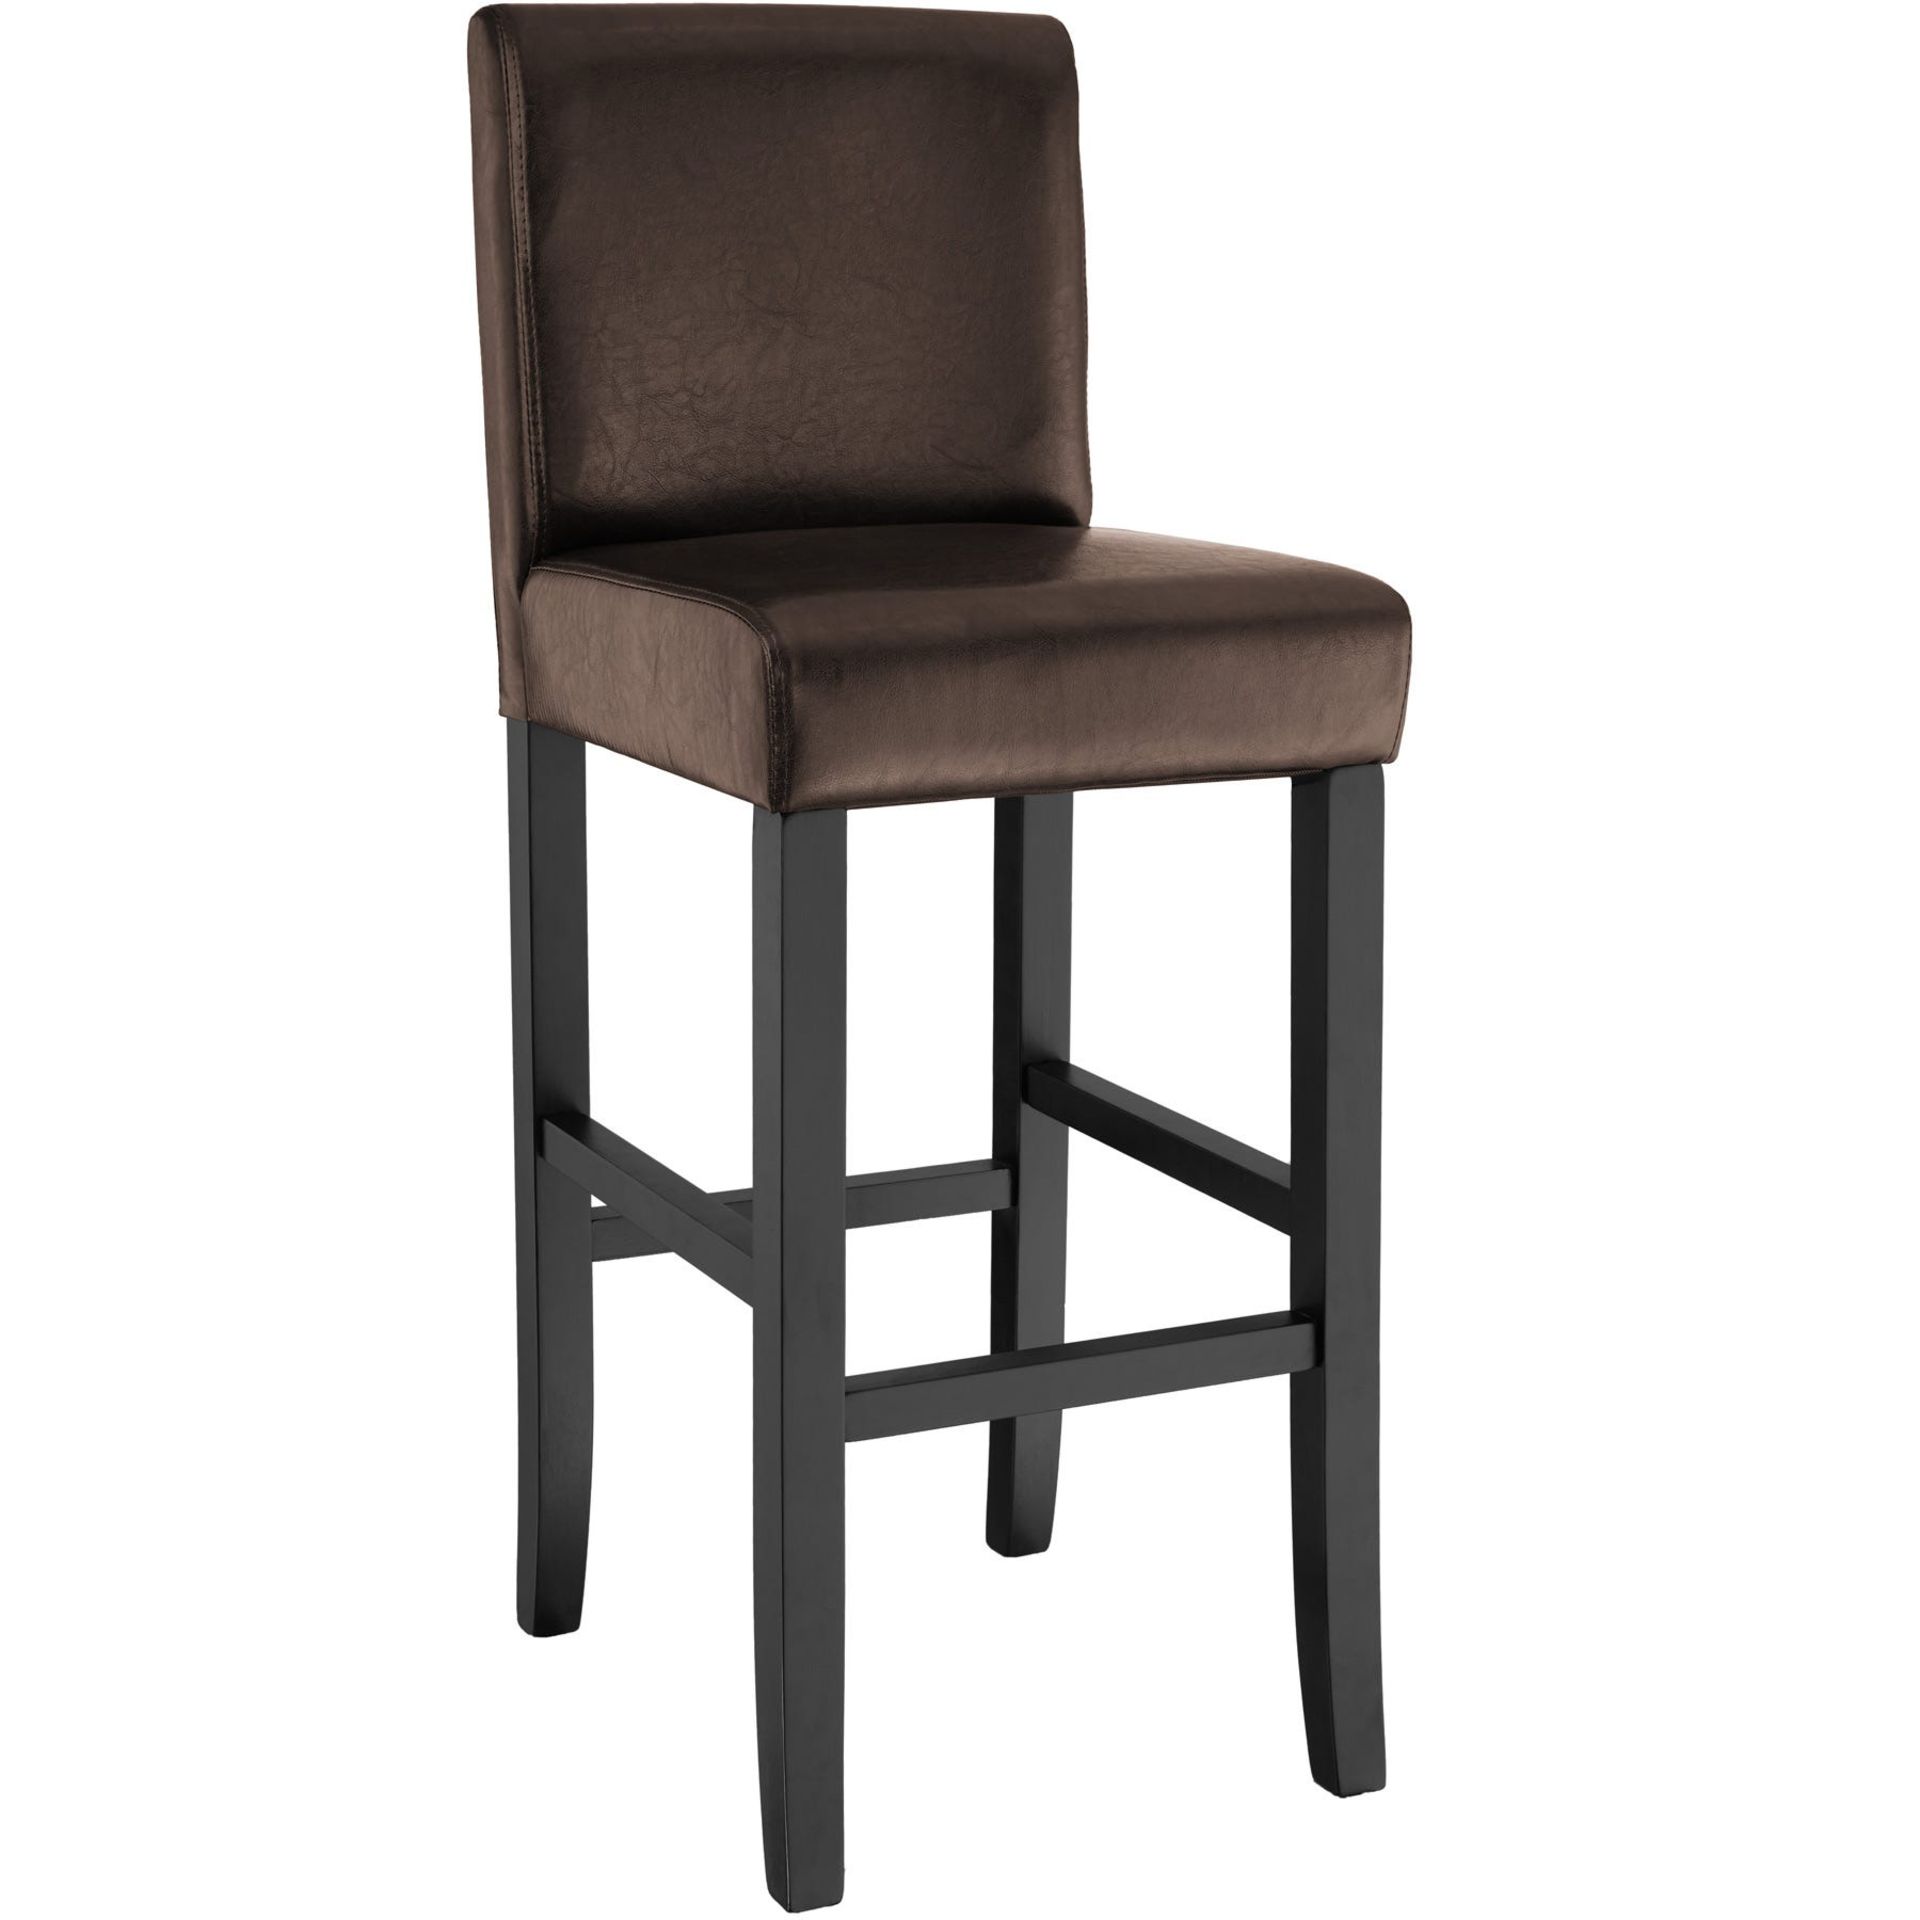 Tectake - Breakfast Bar Stool Made Of Artificial Leather Antique Brown - Boxed. RRP £85.99 - Image 2 of 2